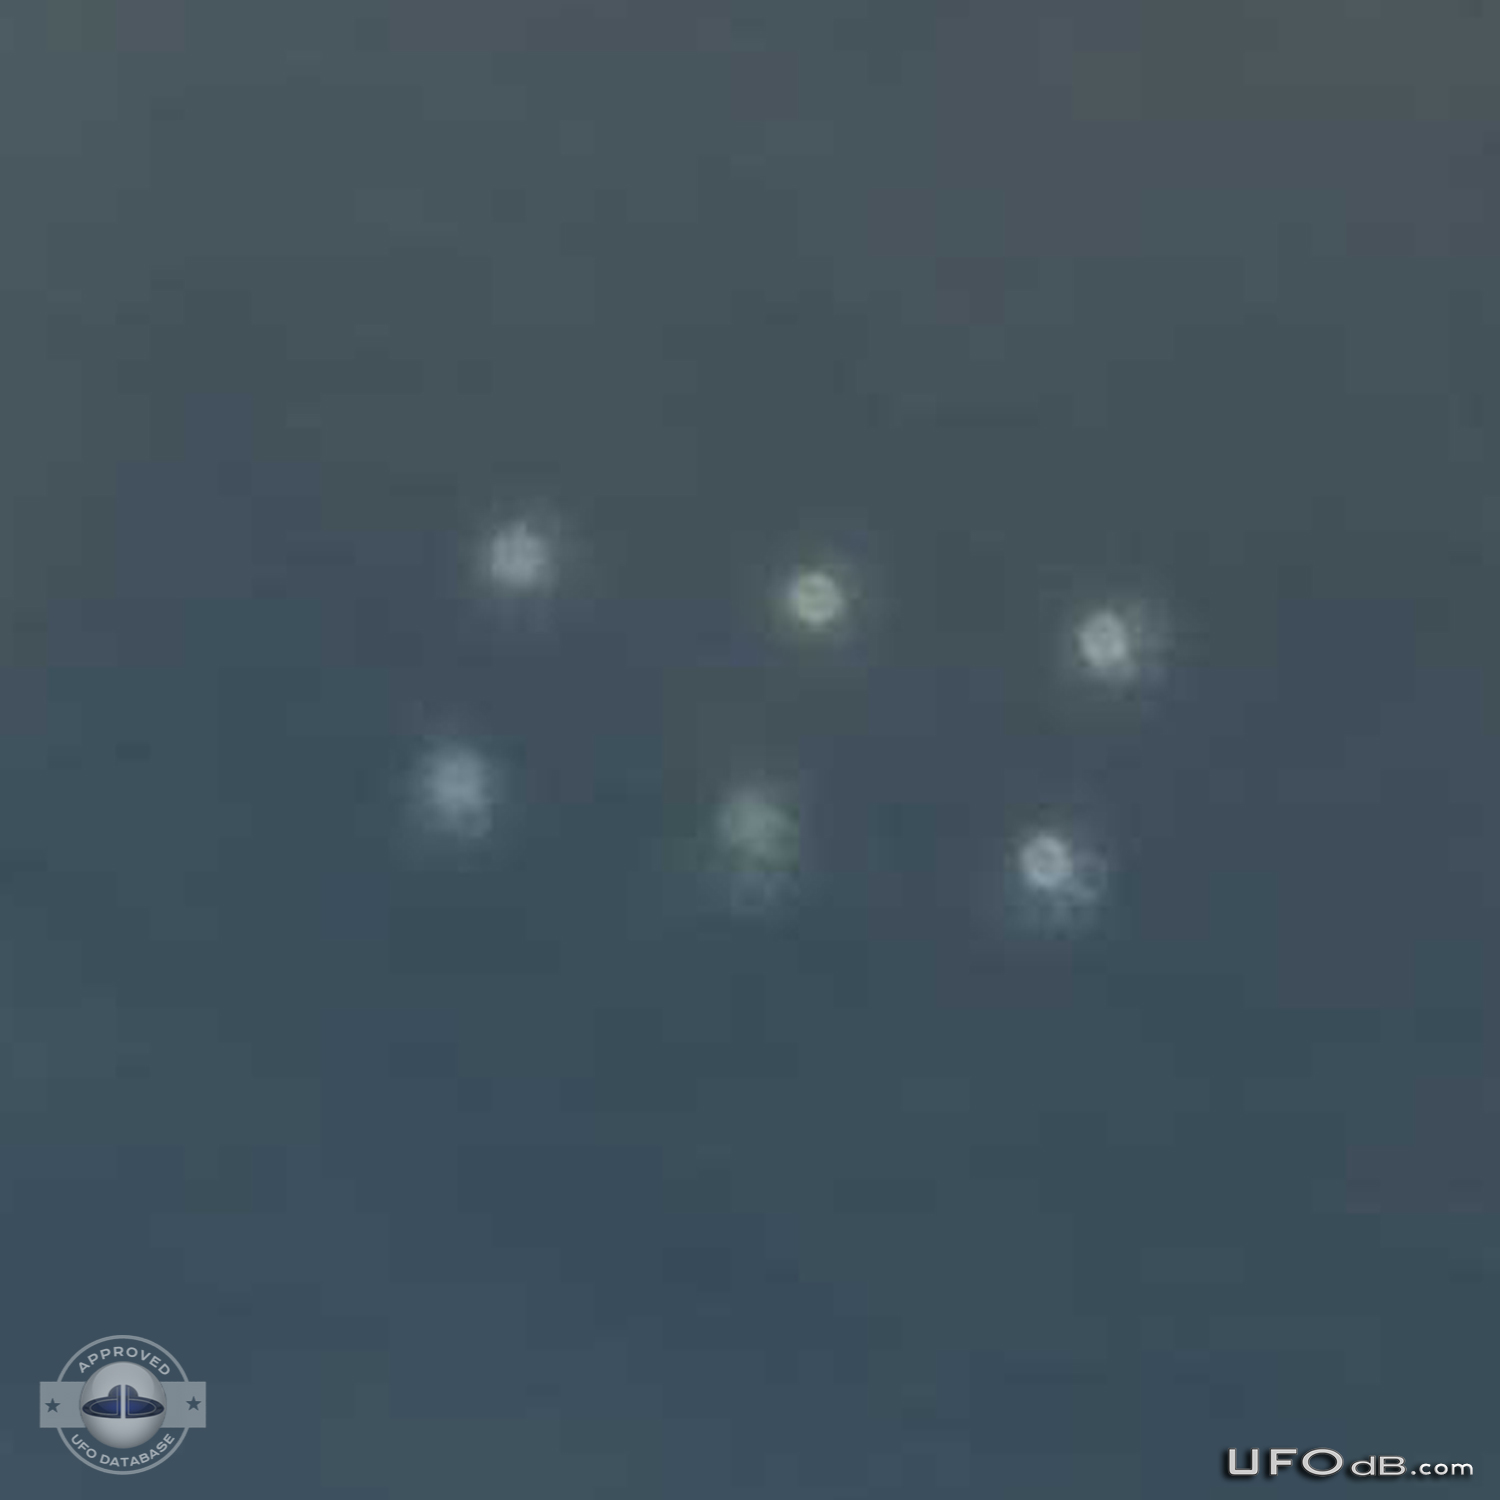 Pictures shot from bus reveals six ufos in a rectangle formation UFO Picture #383-3